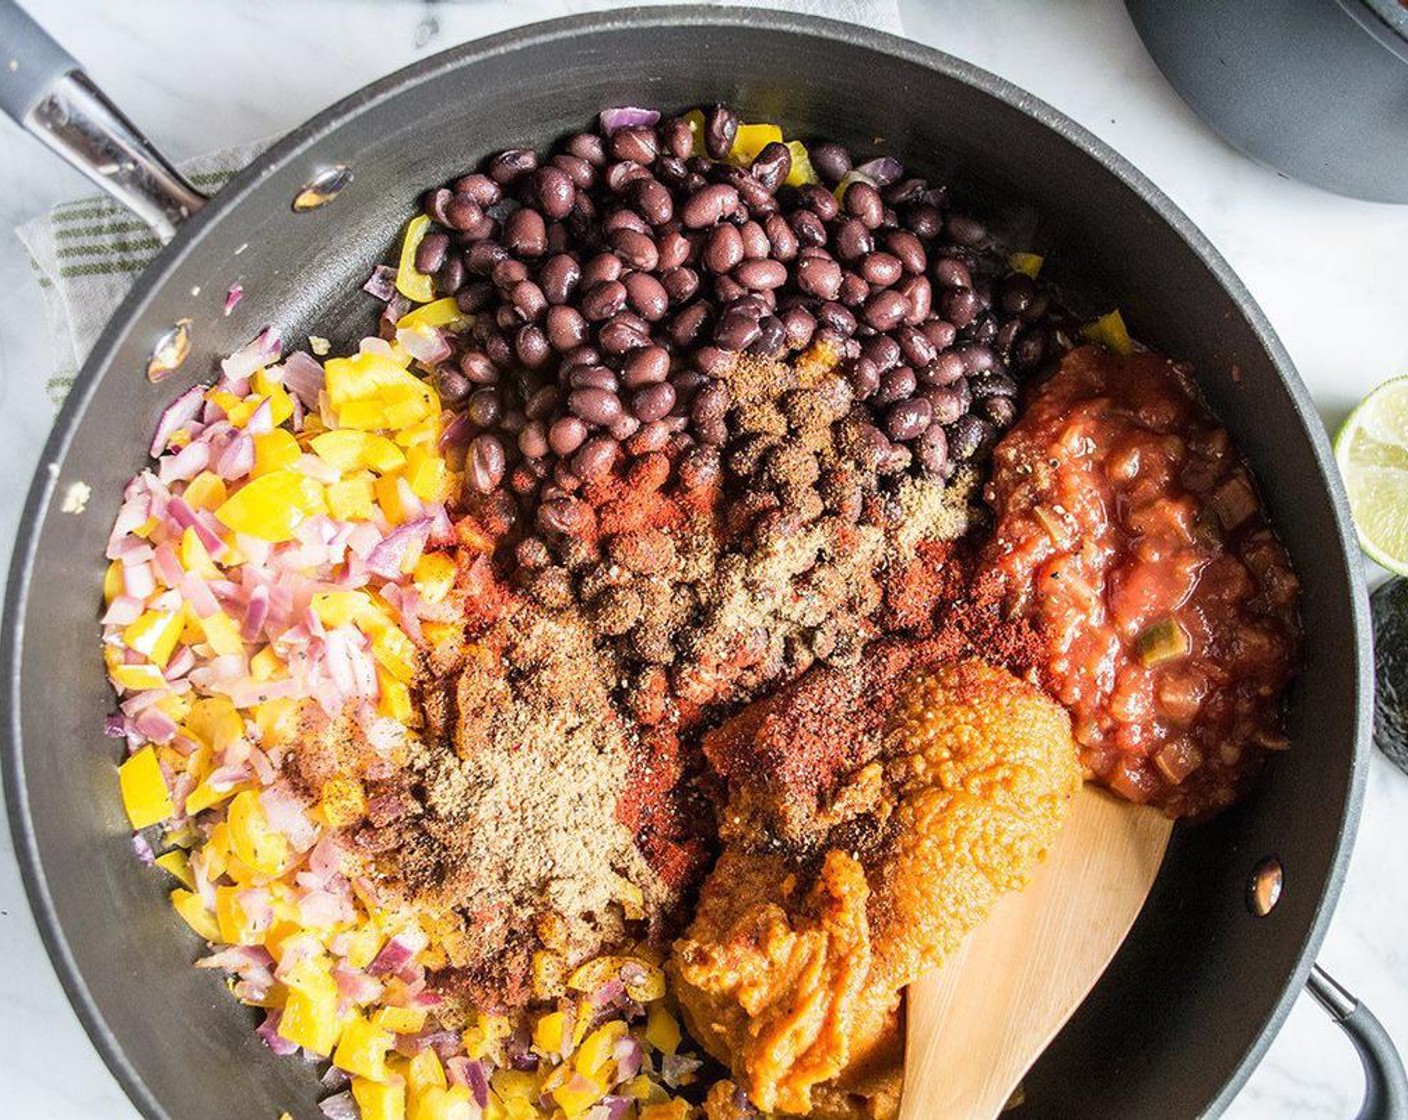 step 3 Add Black Beans (1 can), Canned Pumpkin Purée (1 cup), Mild Salsa (3/4 cup), Chili Powder (1/2 Tbsp), Ground Cumin (1 tsp), Smoked Paprika (1 tsp), and Ground Black Pepper (1/4 tsp), then stir to combine.